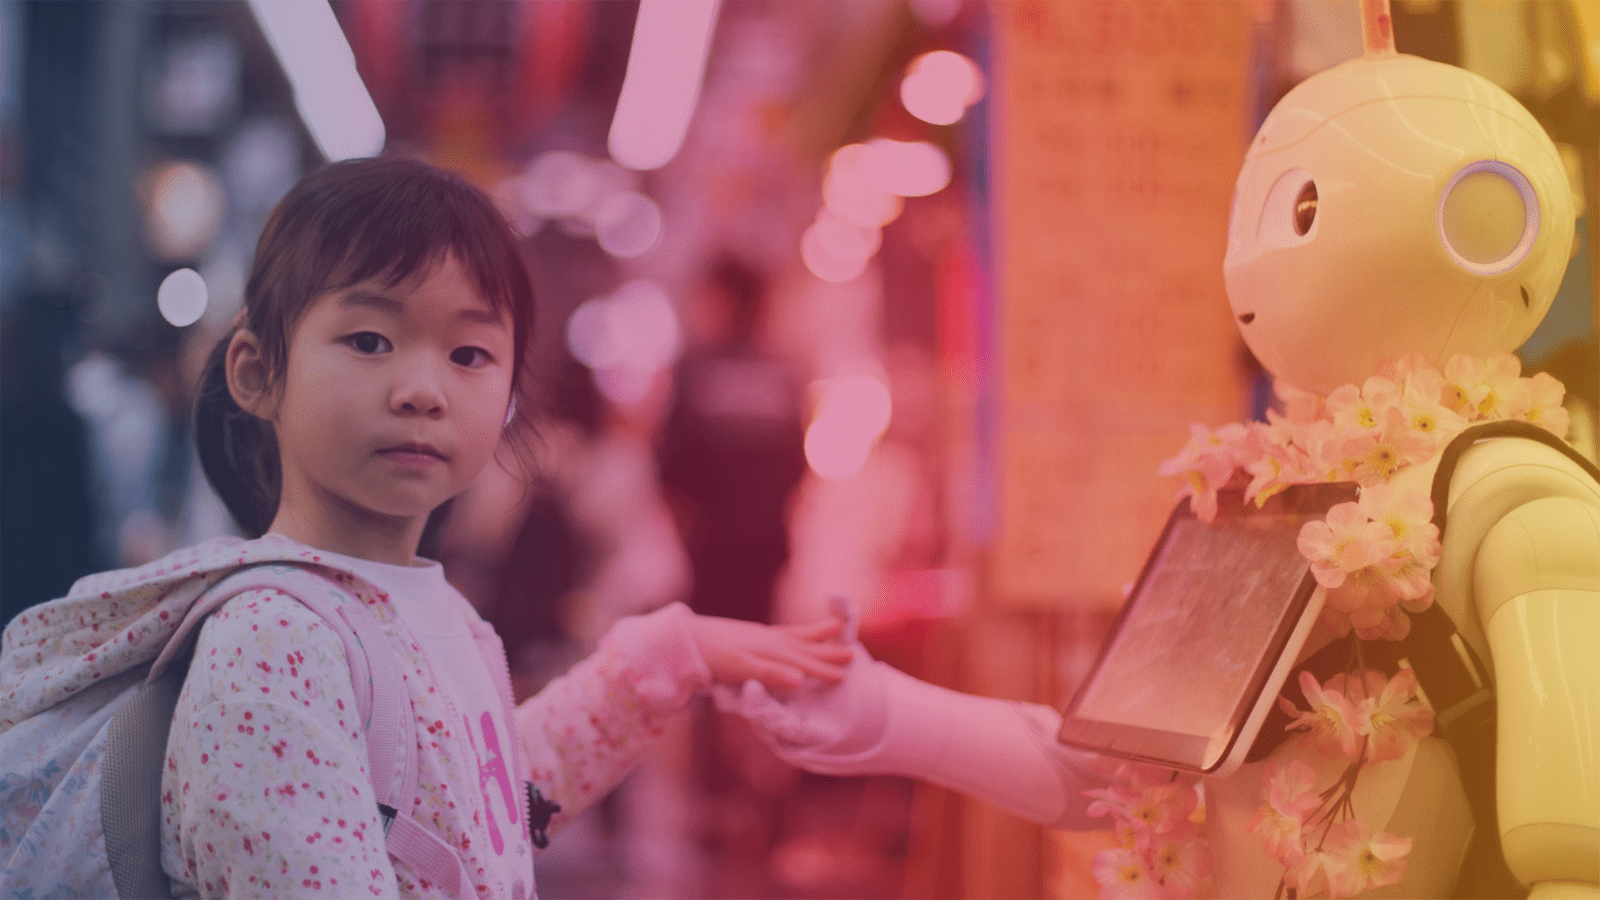 As Kuromon Market in Osaka was about to close for the evening I sampled some delicious king crab and did a final lap of the market when I stumbled upon one of the most Japanese scenes I could possibly imagine, a little girl, making friends with a robot.